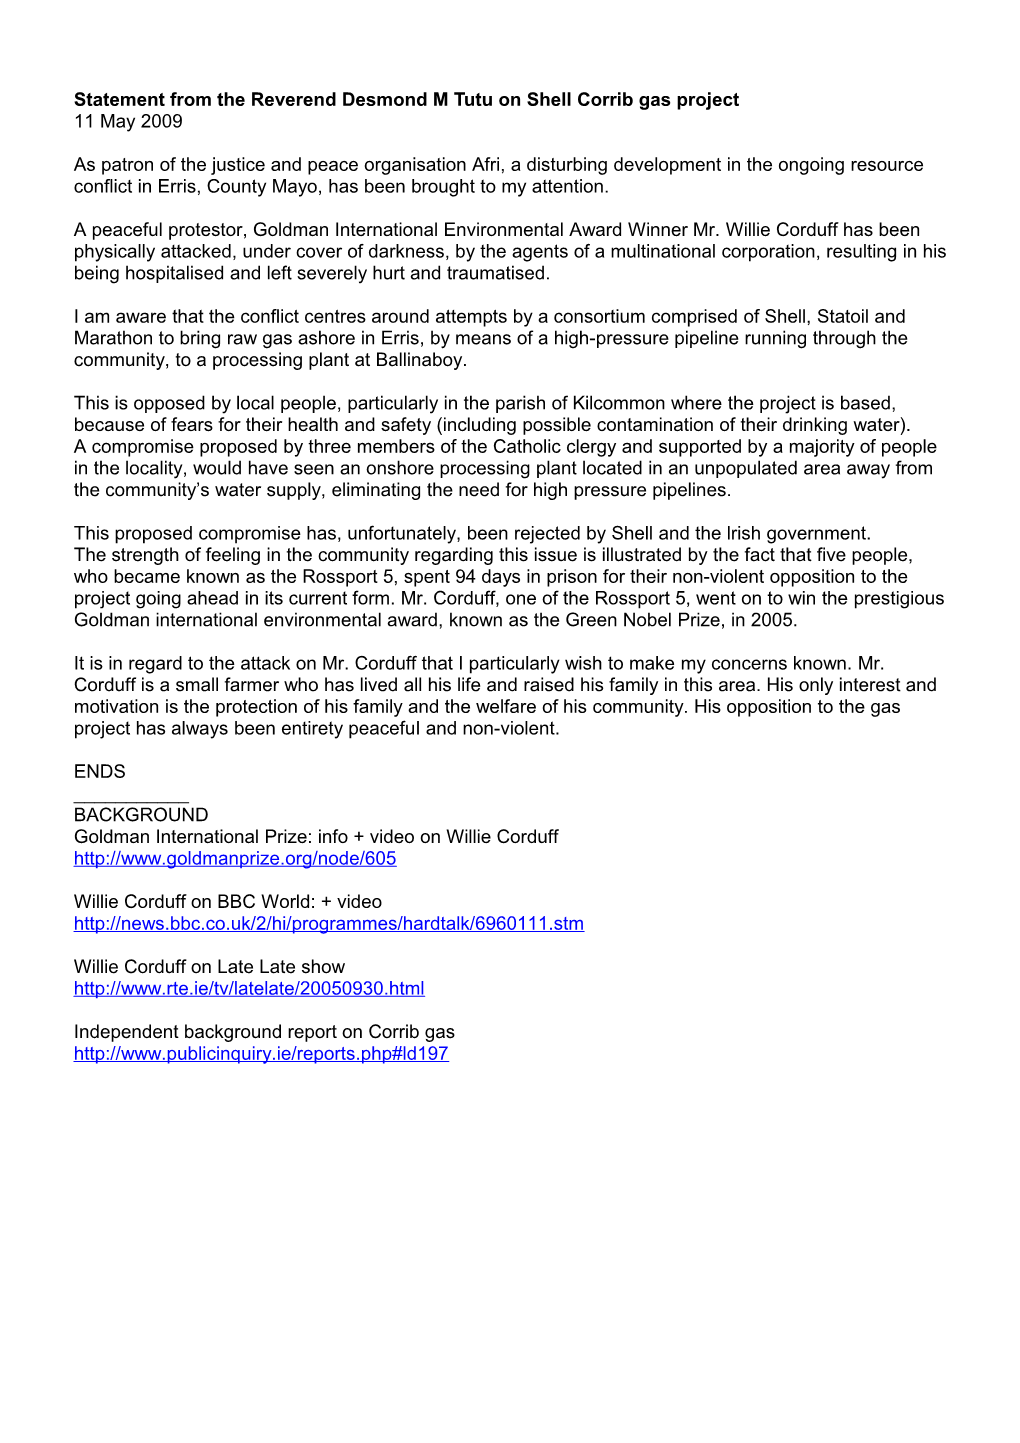 Statement from the Reverend Desmond M Tutu on Shell Corrib Gas Project